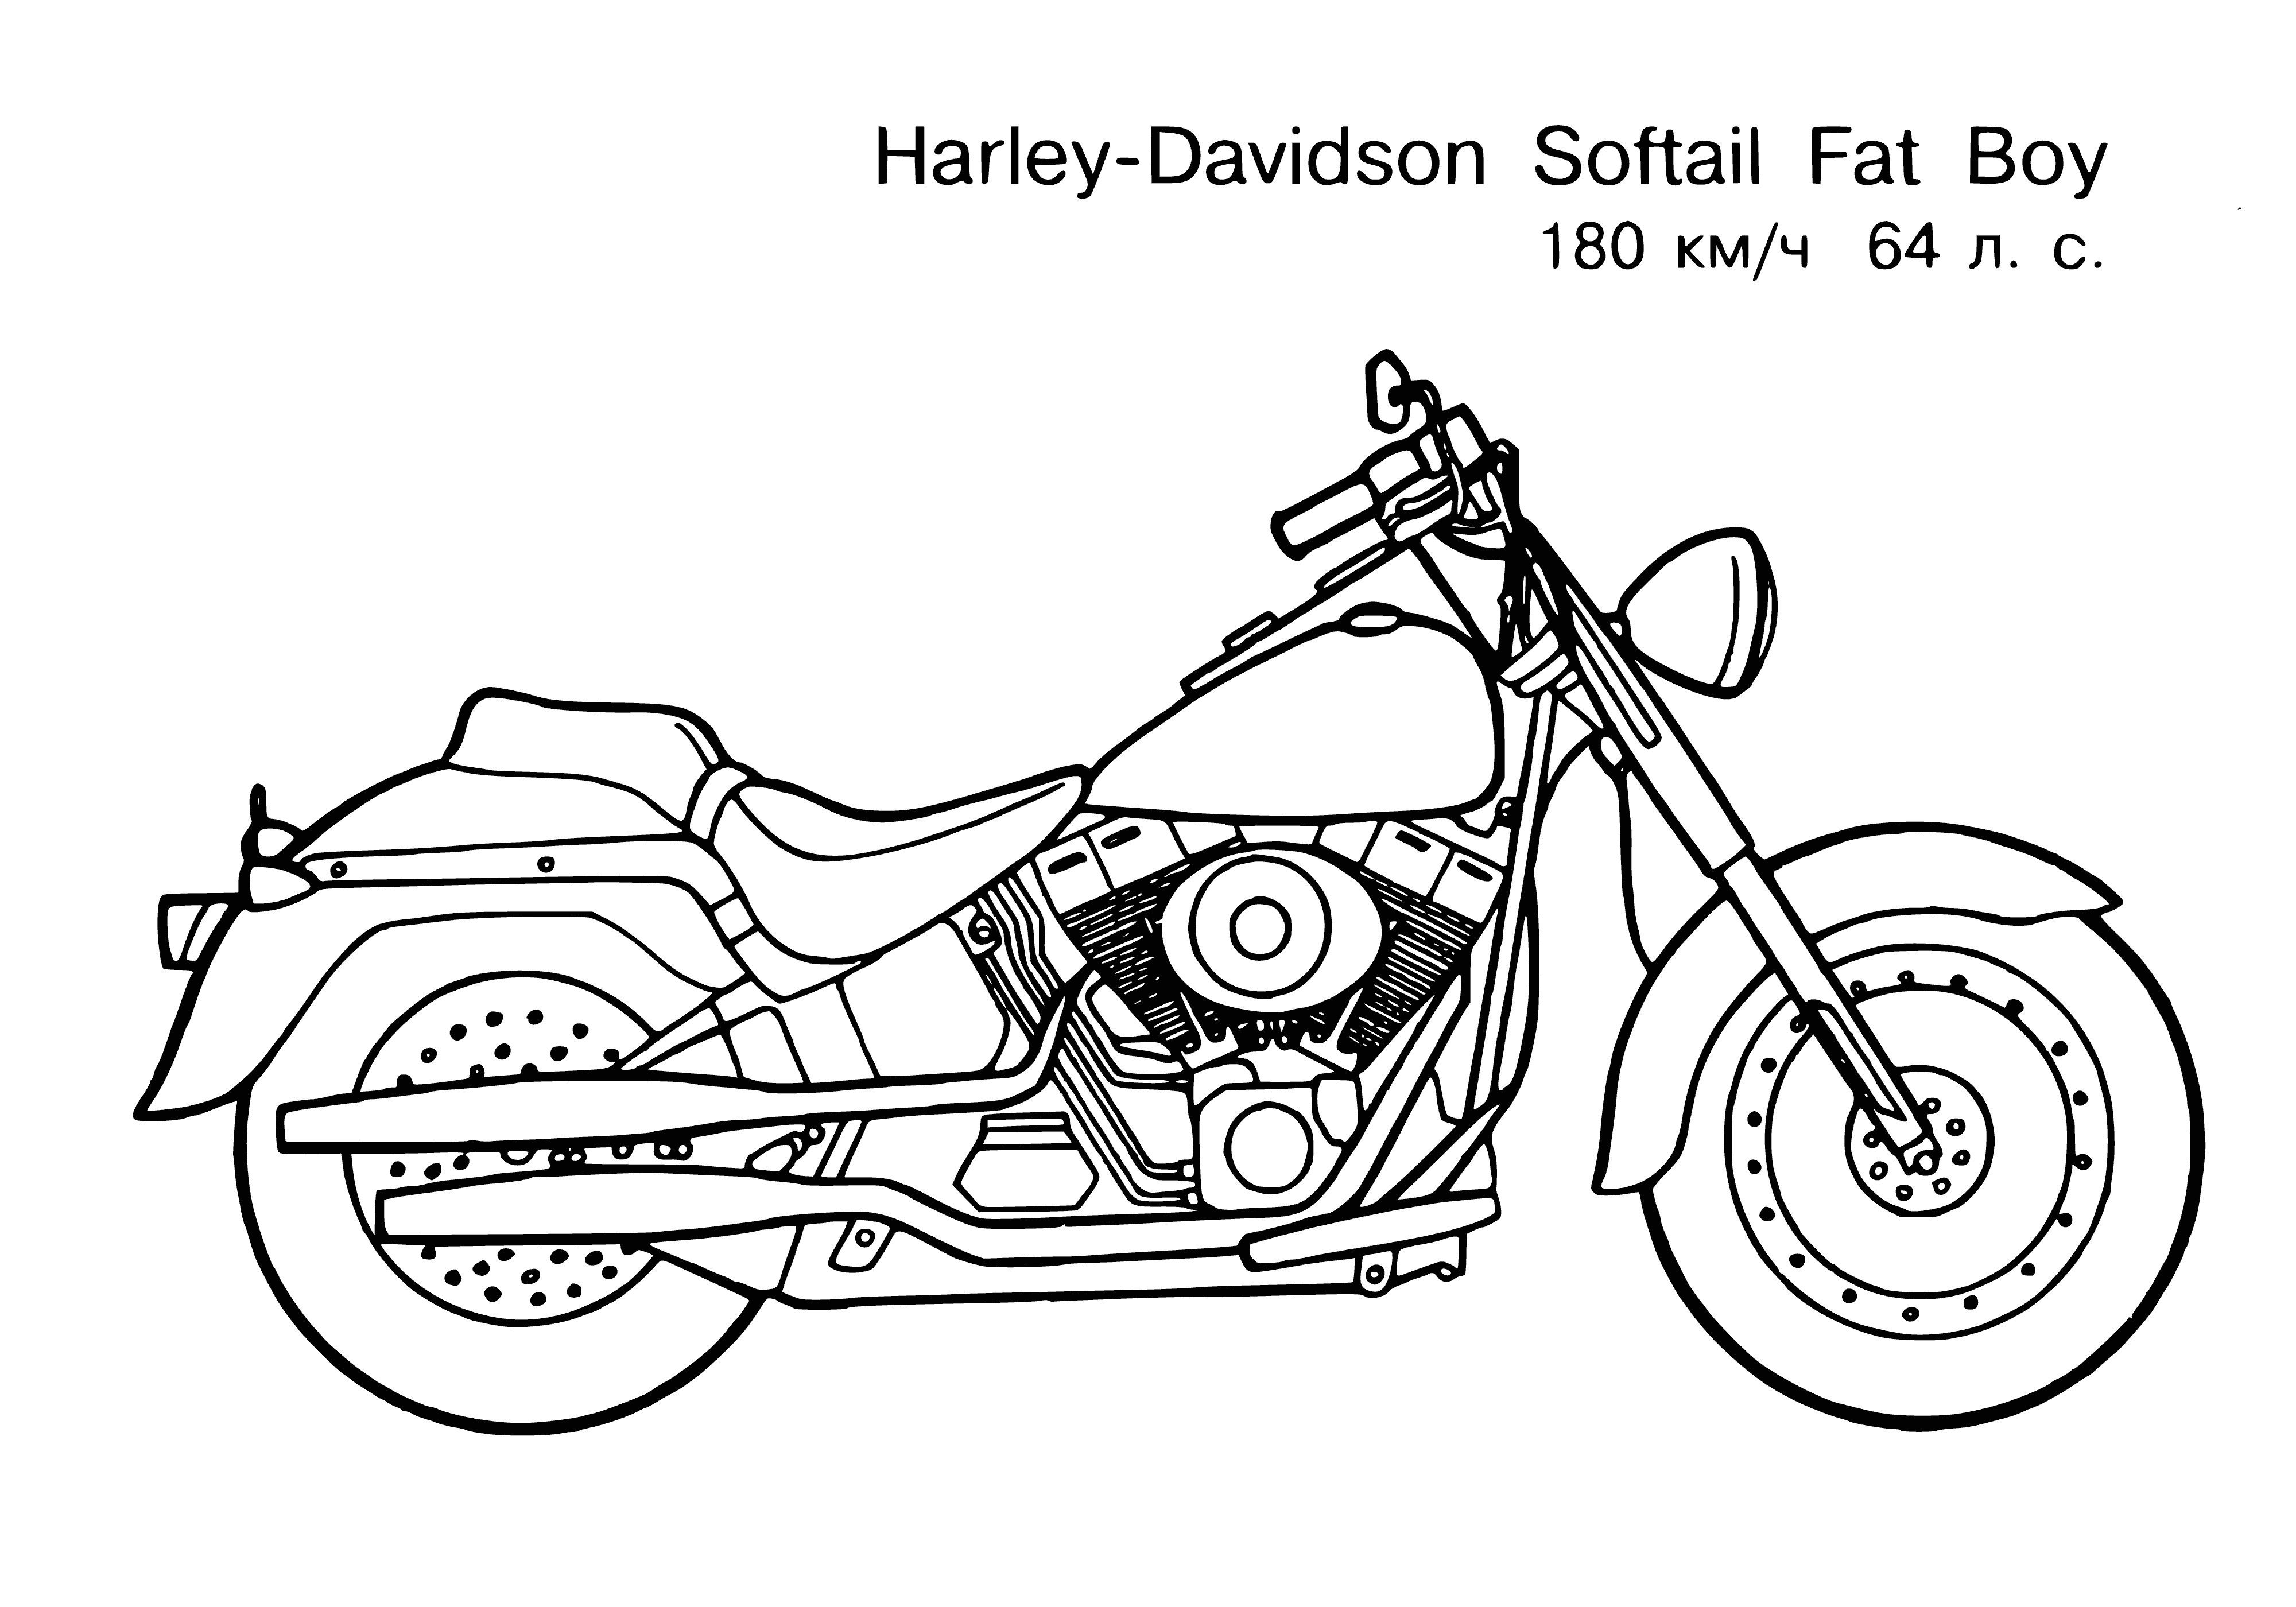 coloring page: Two motorcycles in coloring page: one off-road with large tires & rougher suspension, one for road with small tires & smoother suspension.